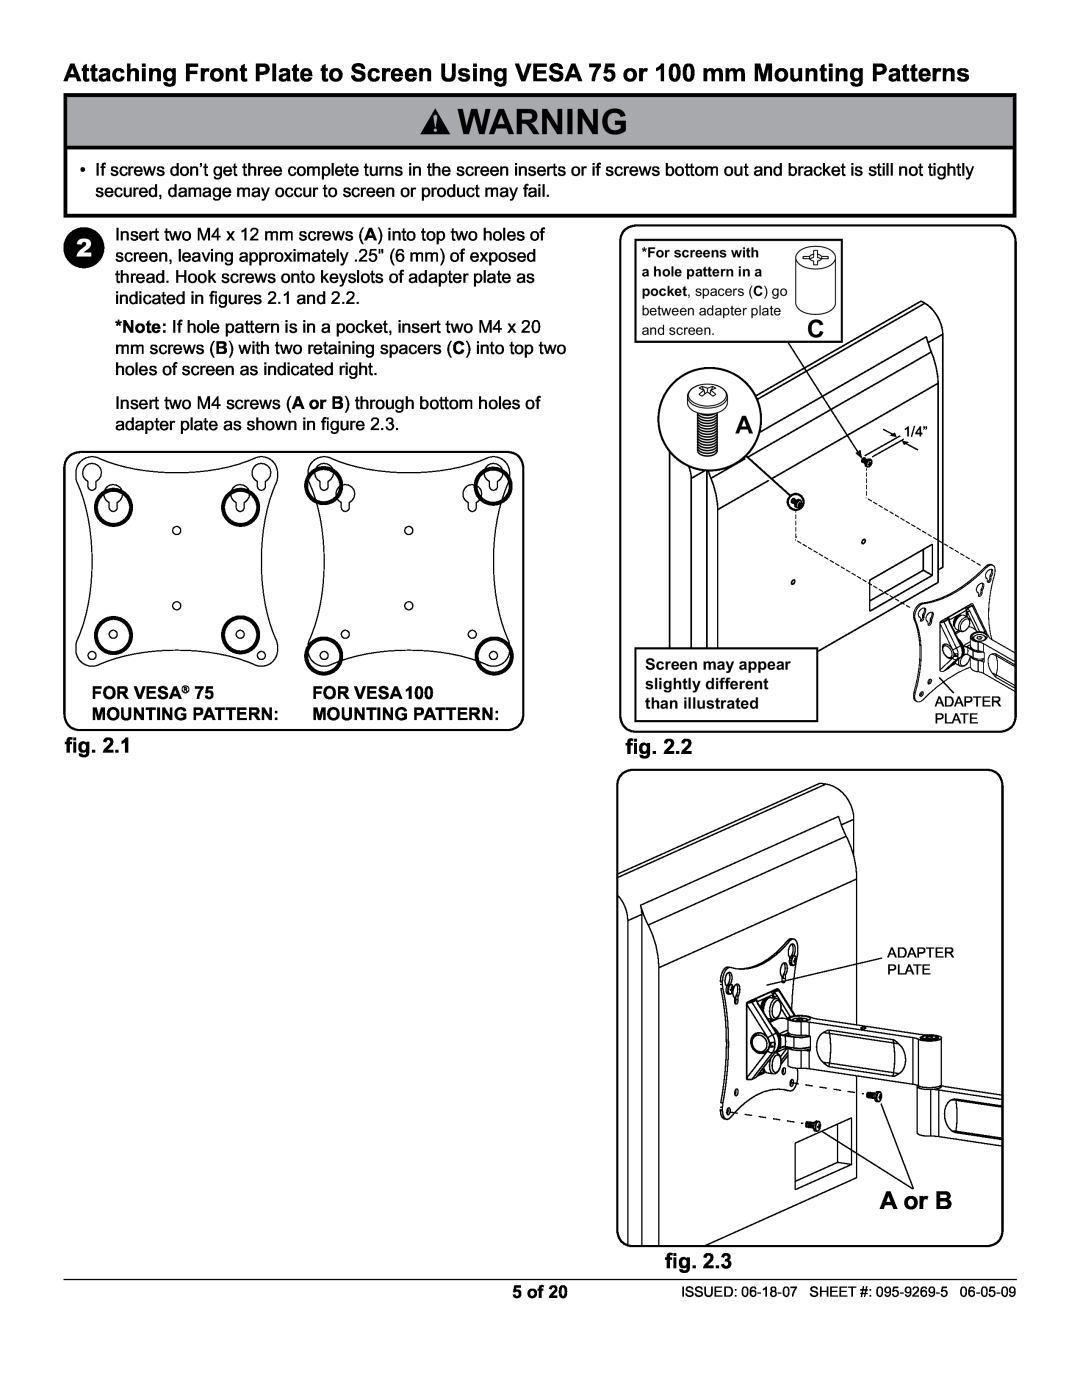 Peerless Industries PA730-S manual A or B, For Vesa, FOR VESA100, Mounting Pattern, 5 of 